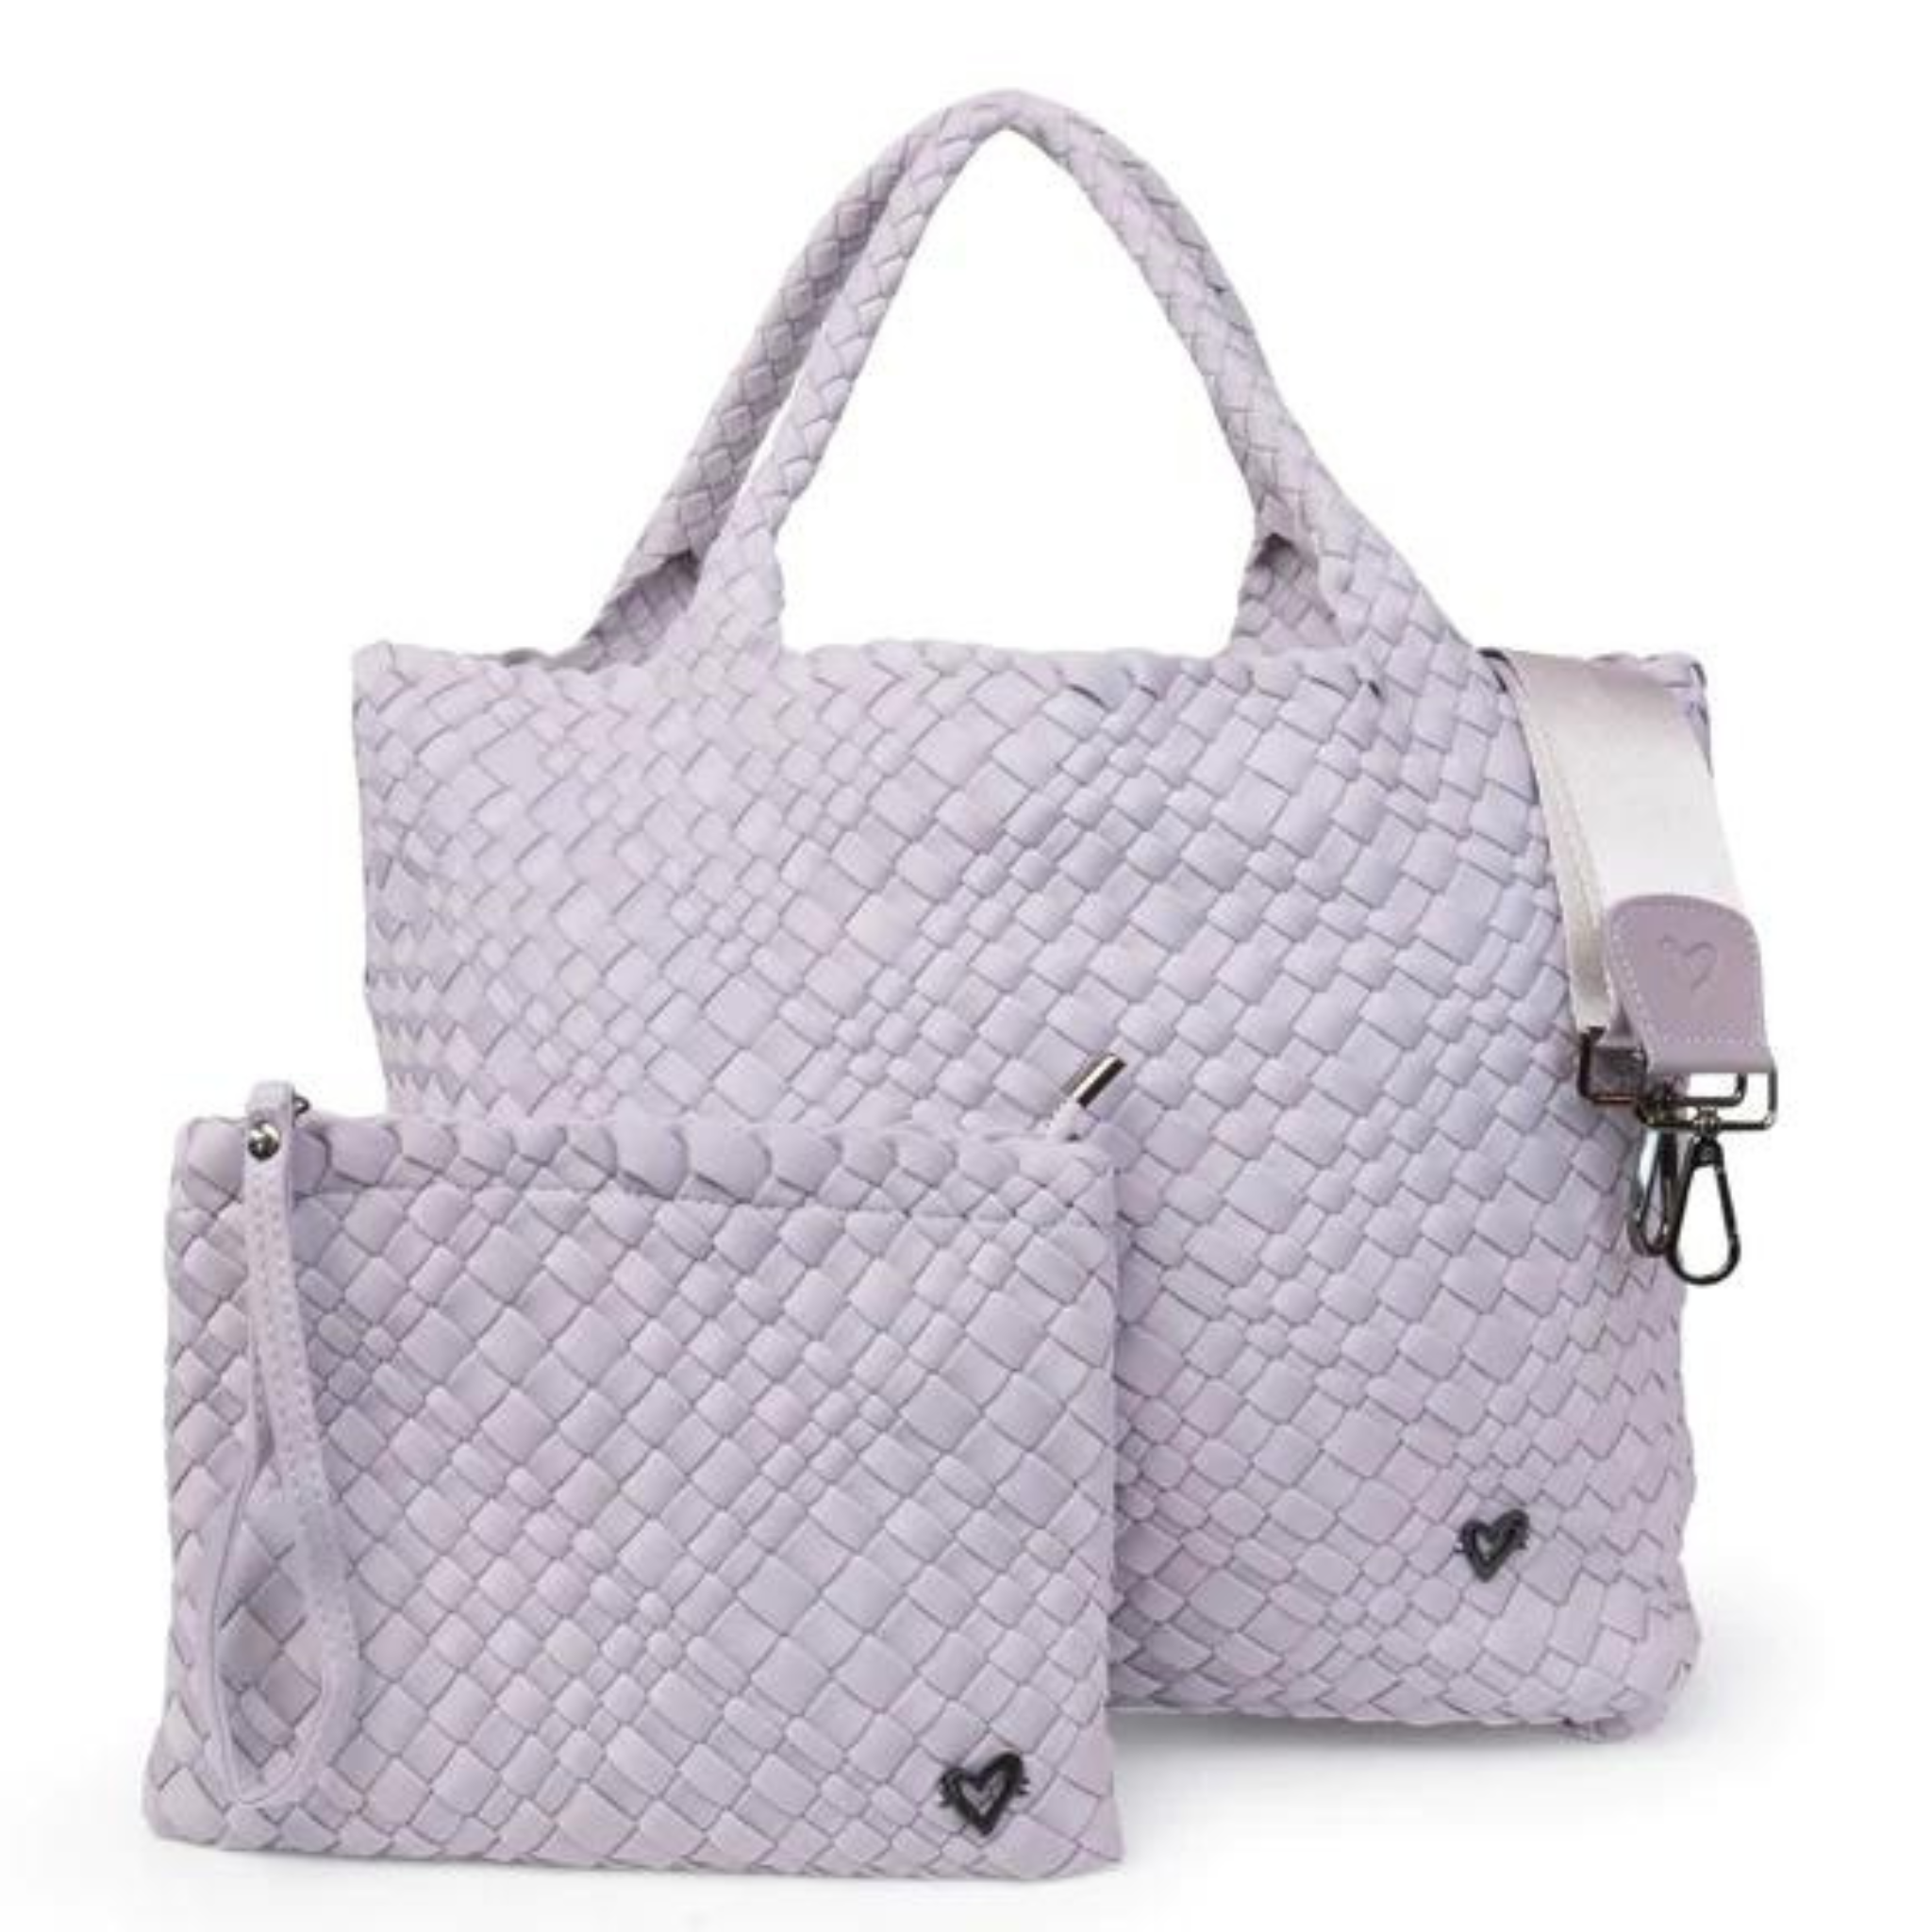 LONDON HAND-WOVEN LARGE TOTE